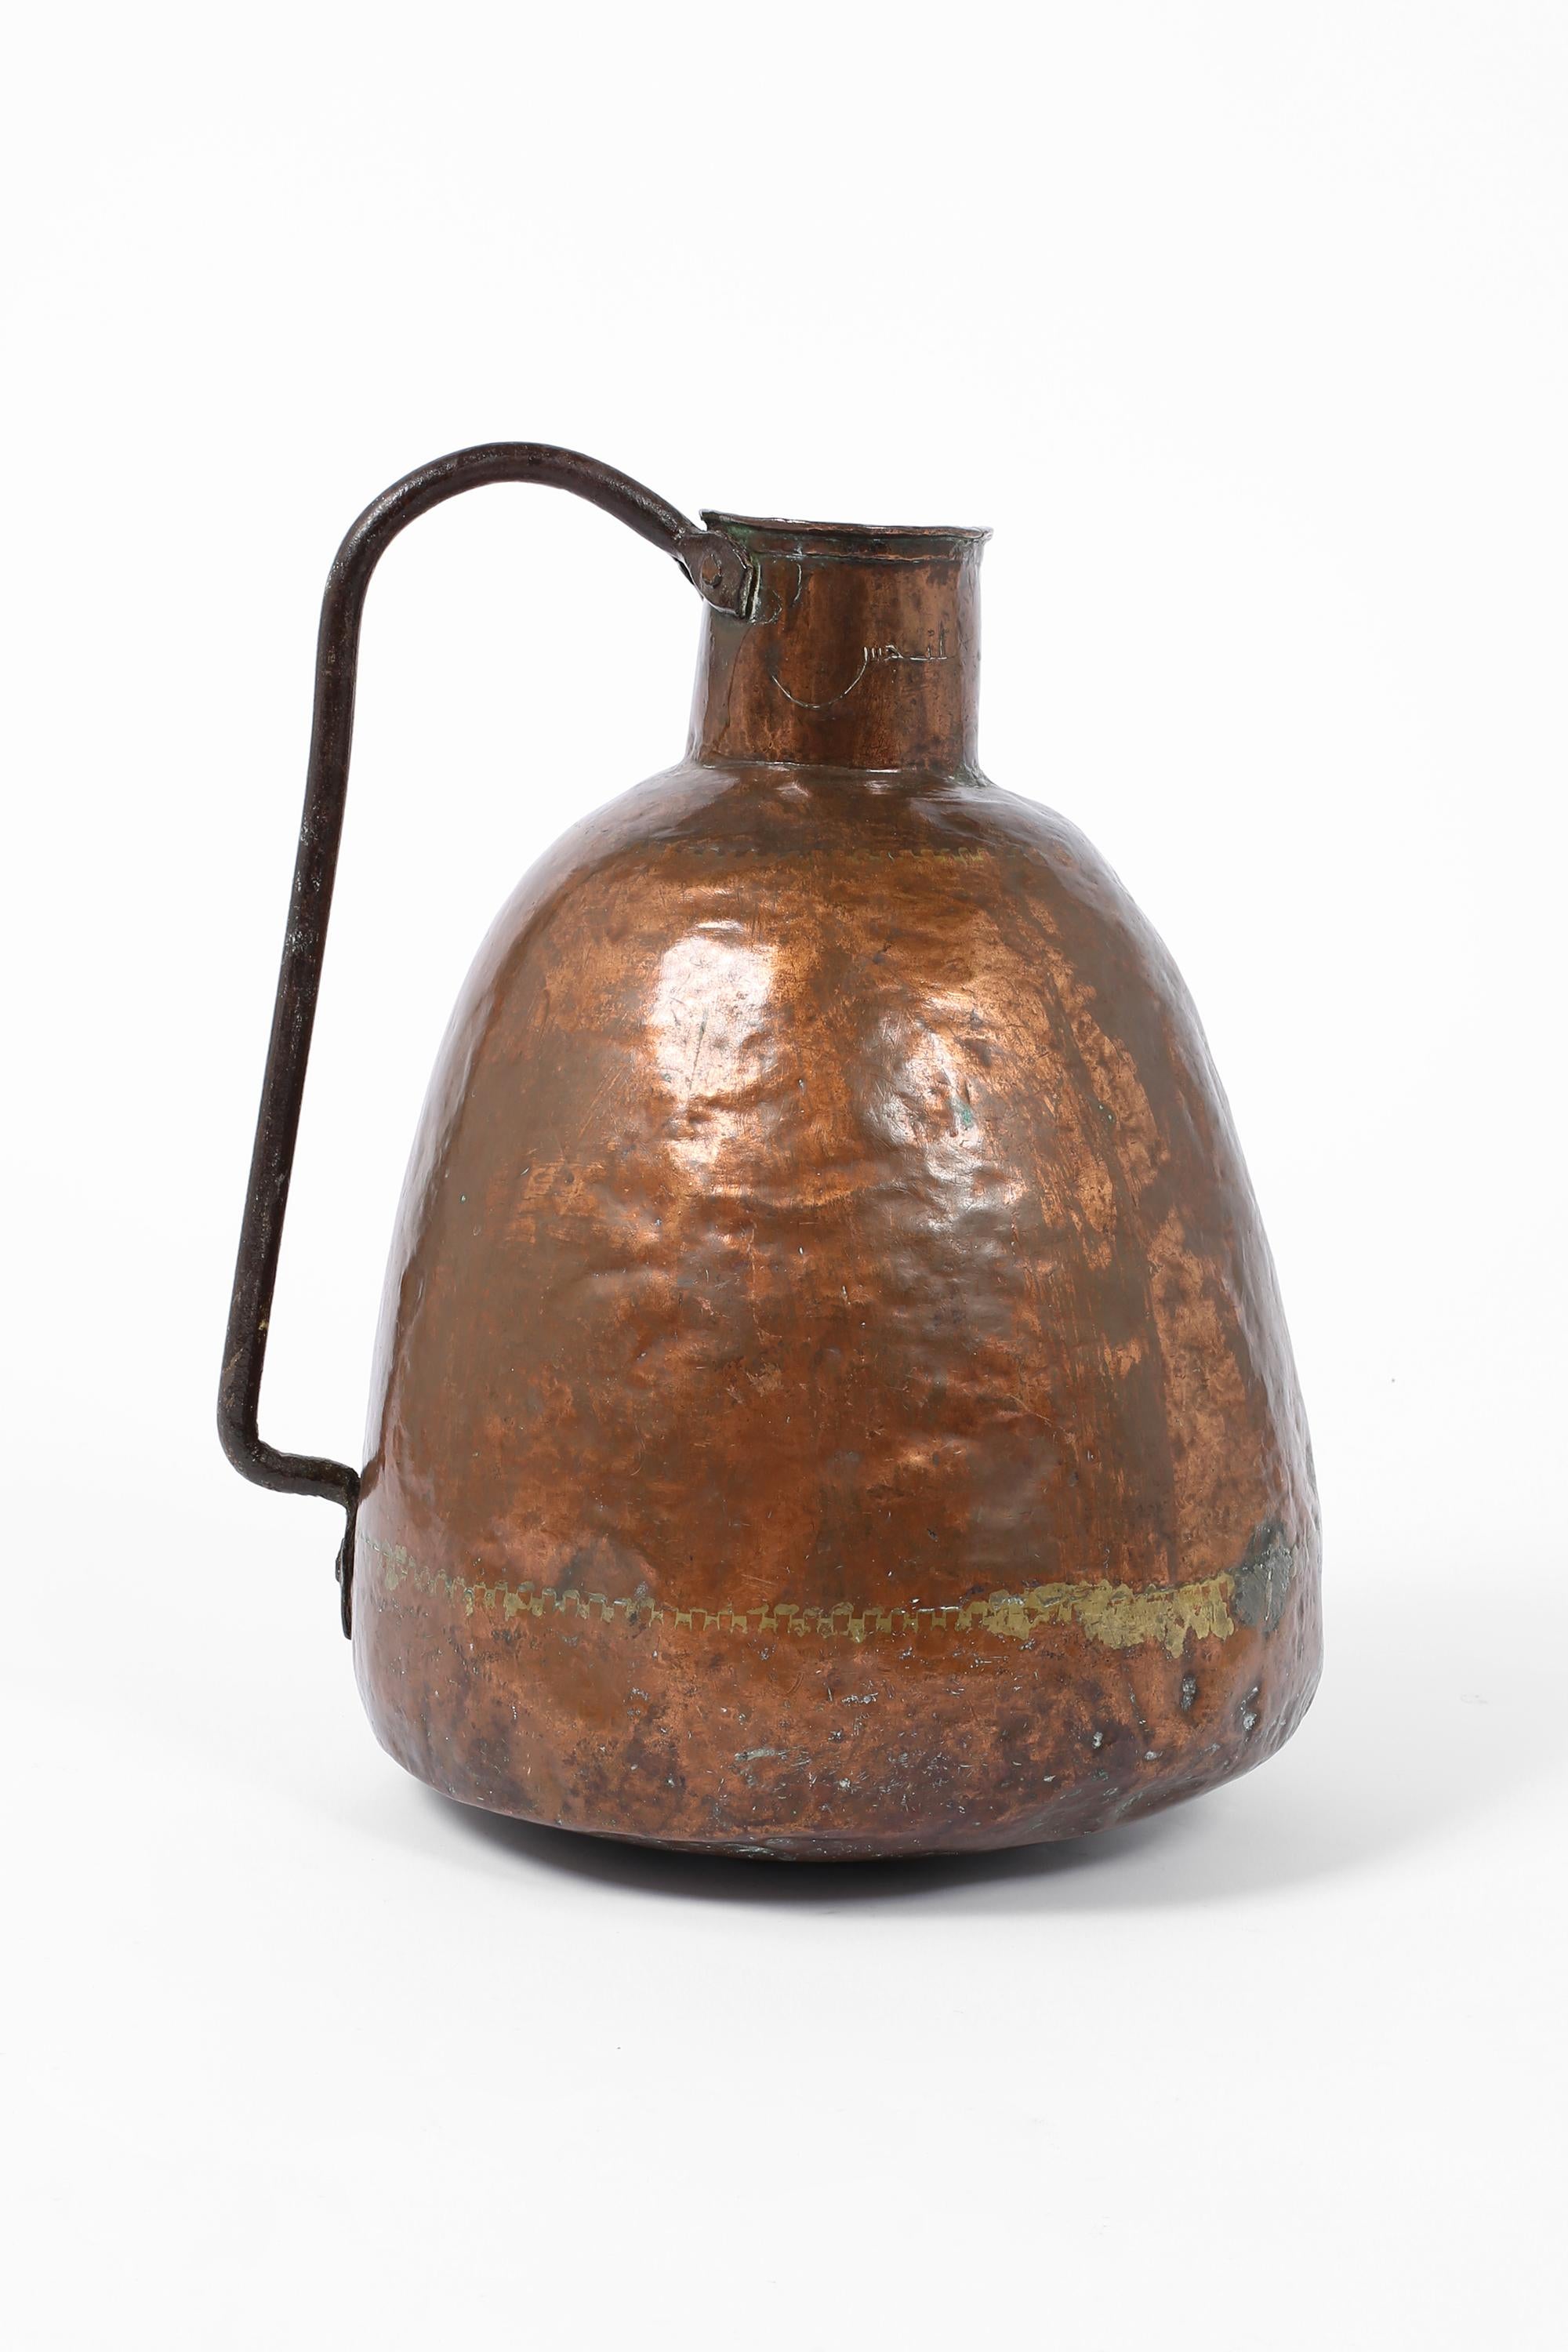 A large, beautifully patinated late 19th century water pitcher or vessel, of dovetailed copper construction with forged iron handle. Indistinctly engraved ??? to the neck, meaning ‘unclean’ in Arabic. Algerian, c. 1890.